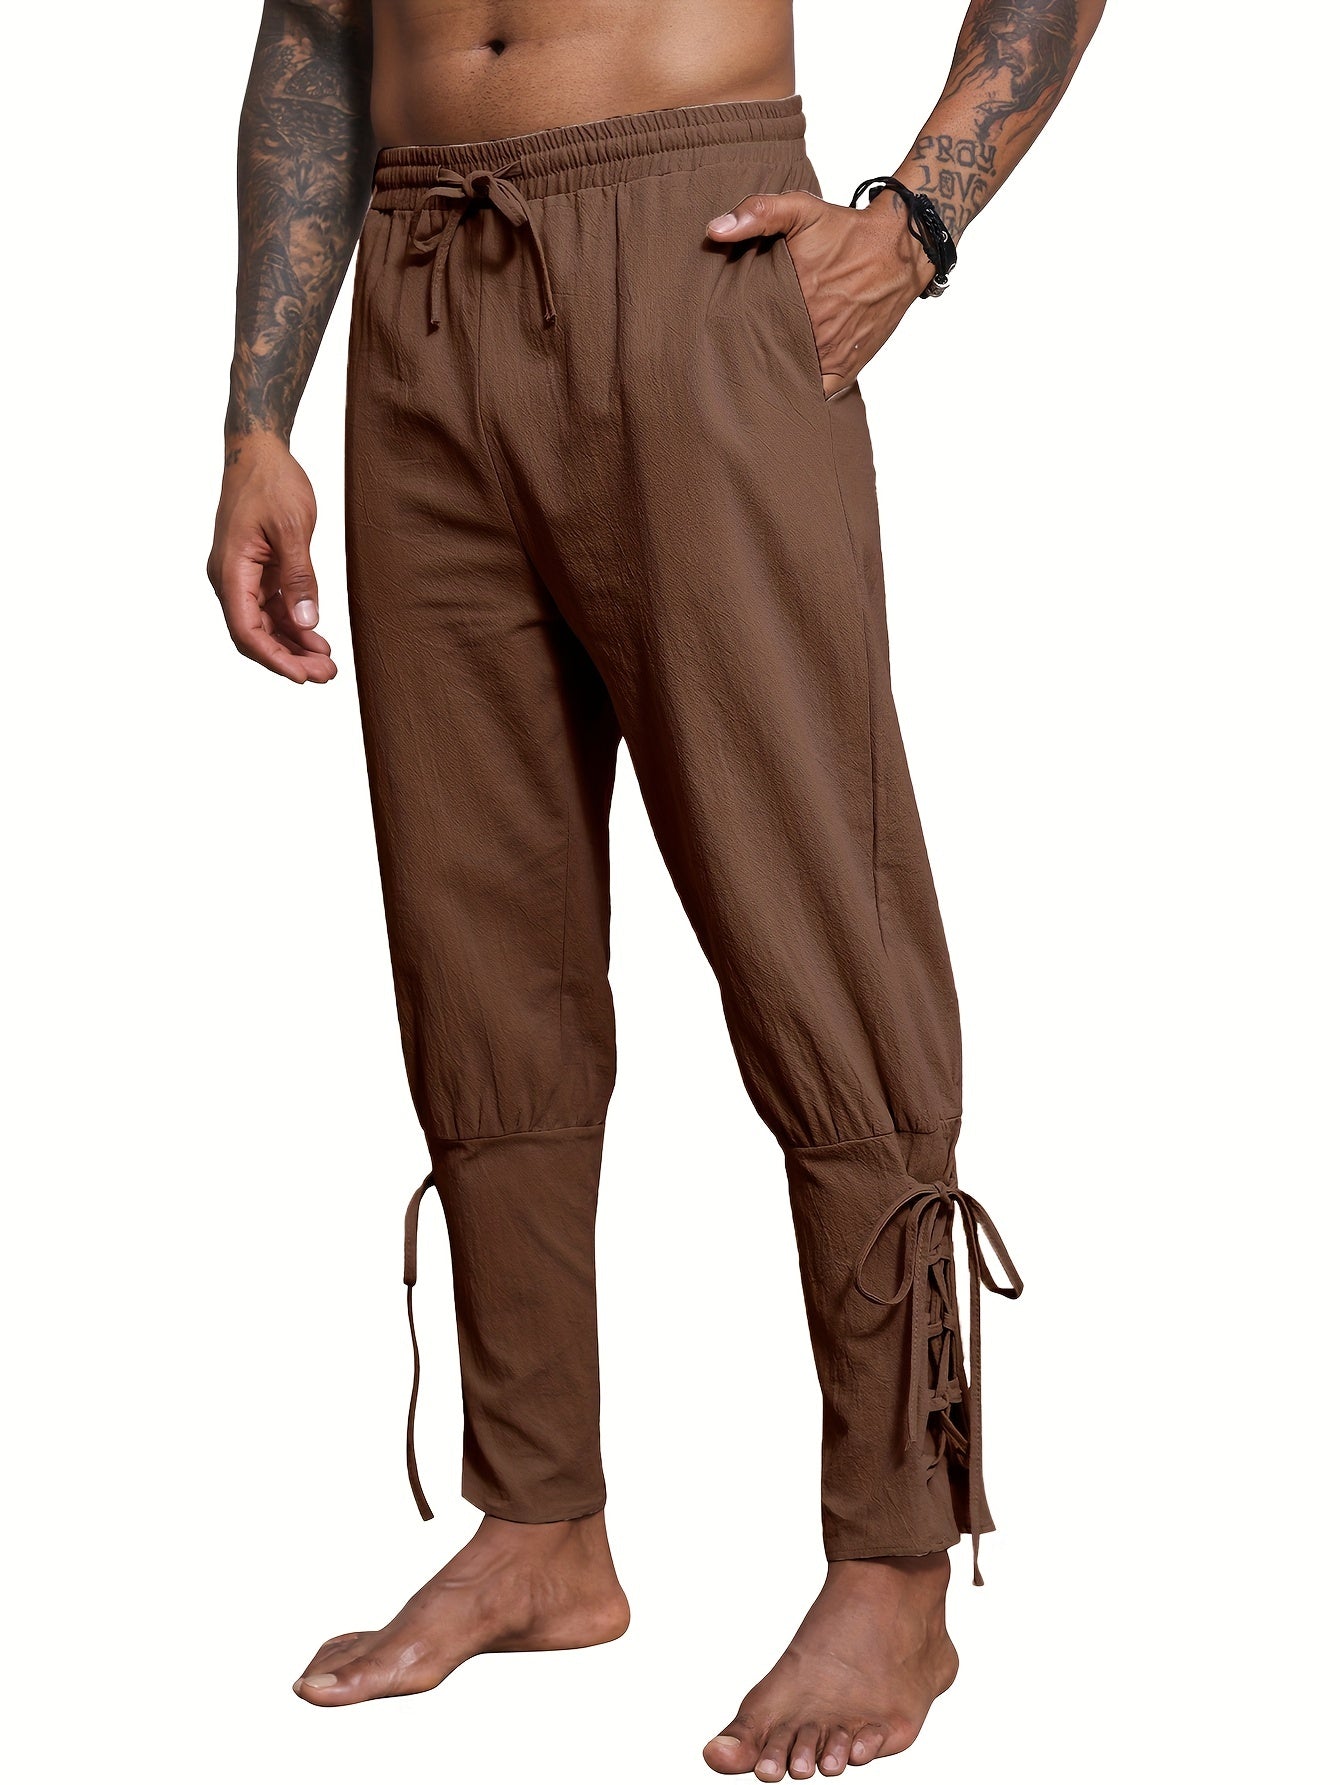 Cotton & Linen Blend Men's Lace Up Bottom Beach Harem Pant Retro Medieval Casual Cosplay Pirate Pants Halloween Streetwear  .As Gift